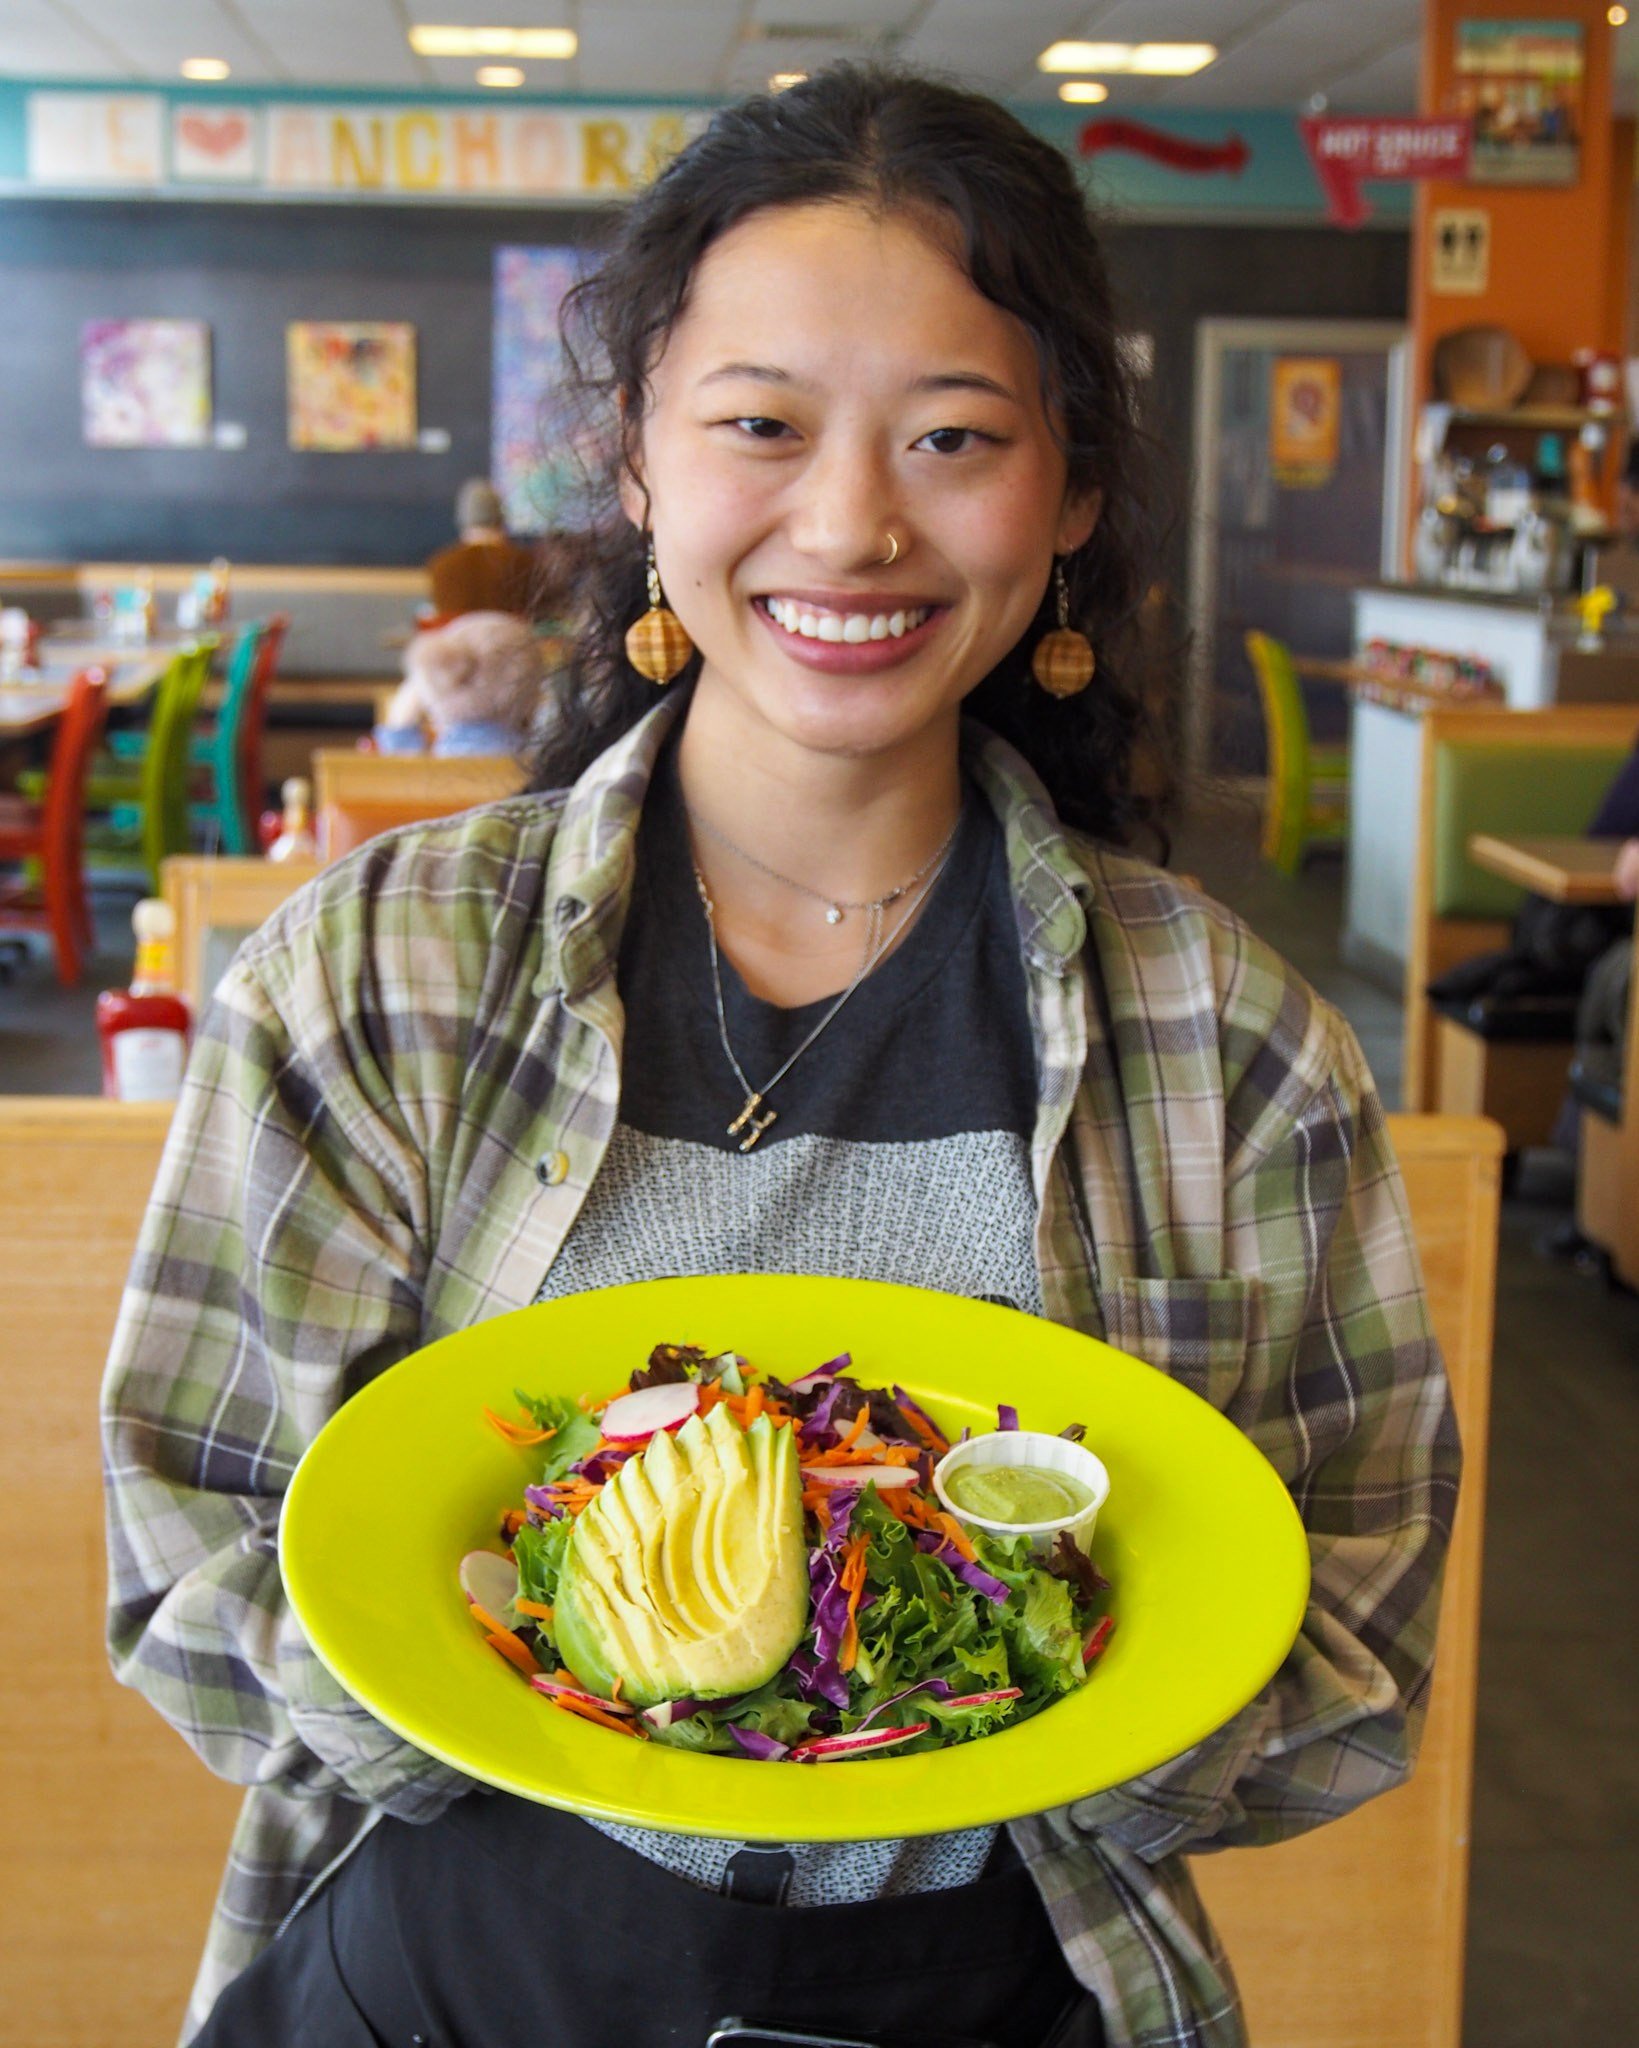 It&rsquo;s your last chance to try some of the amazing items on April&rsquo;s Fresh Sheet! Drop by and try our Green Goddess salad or the Sayulita Scramble!